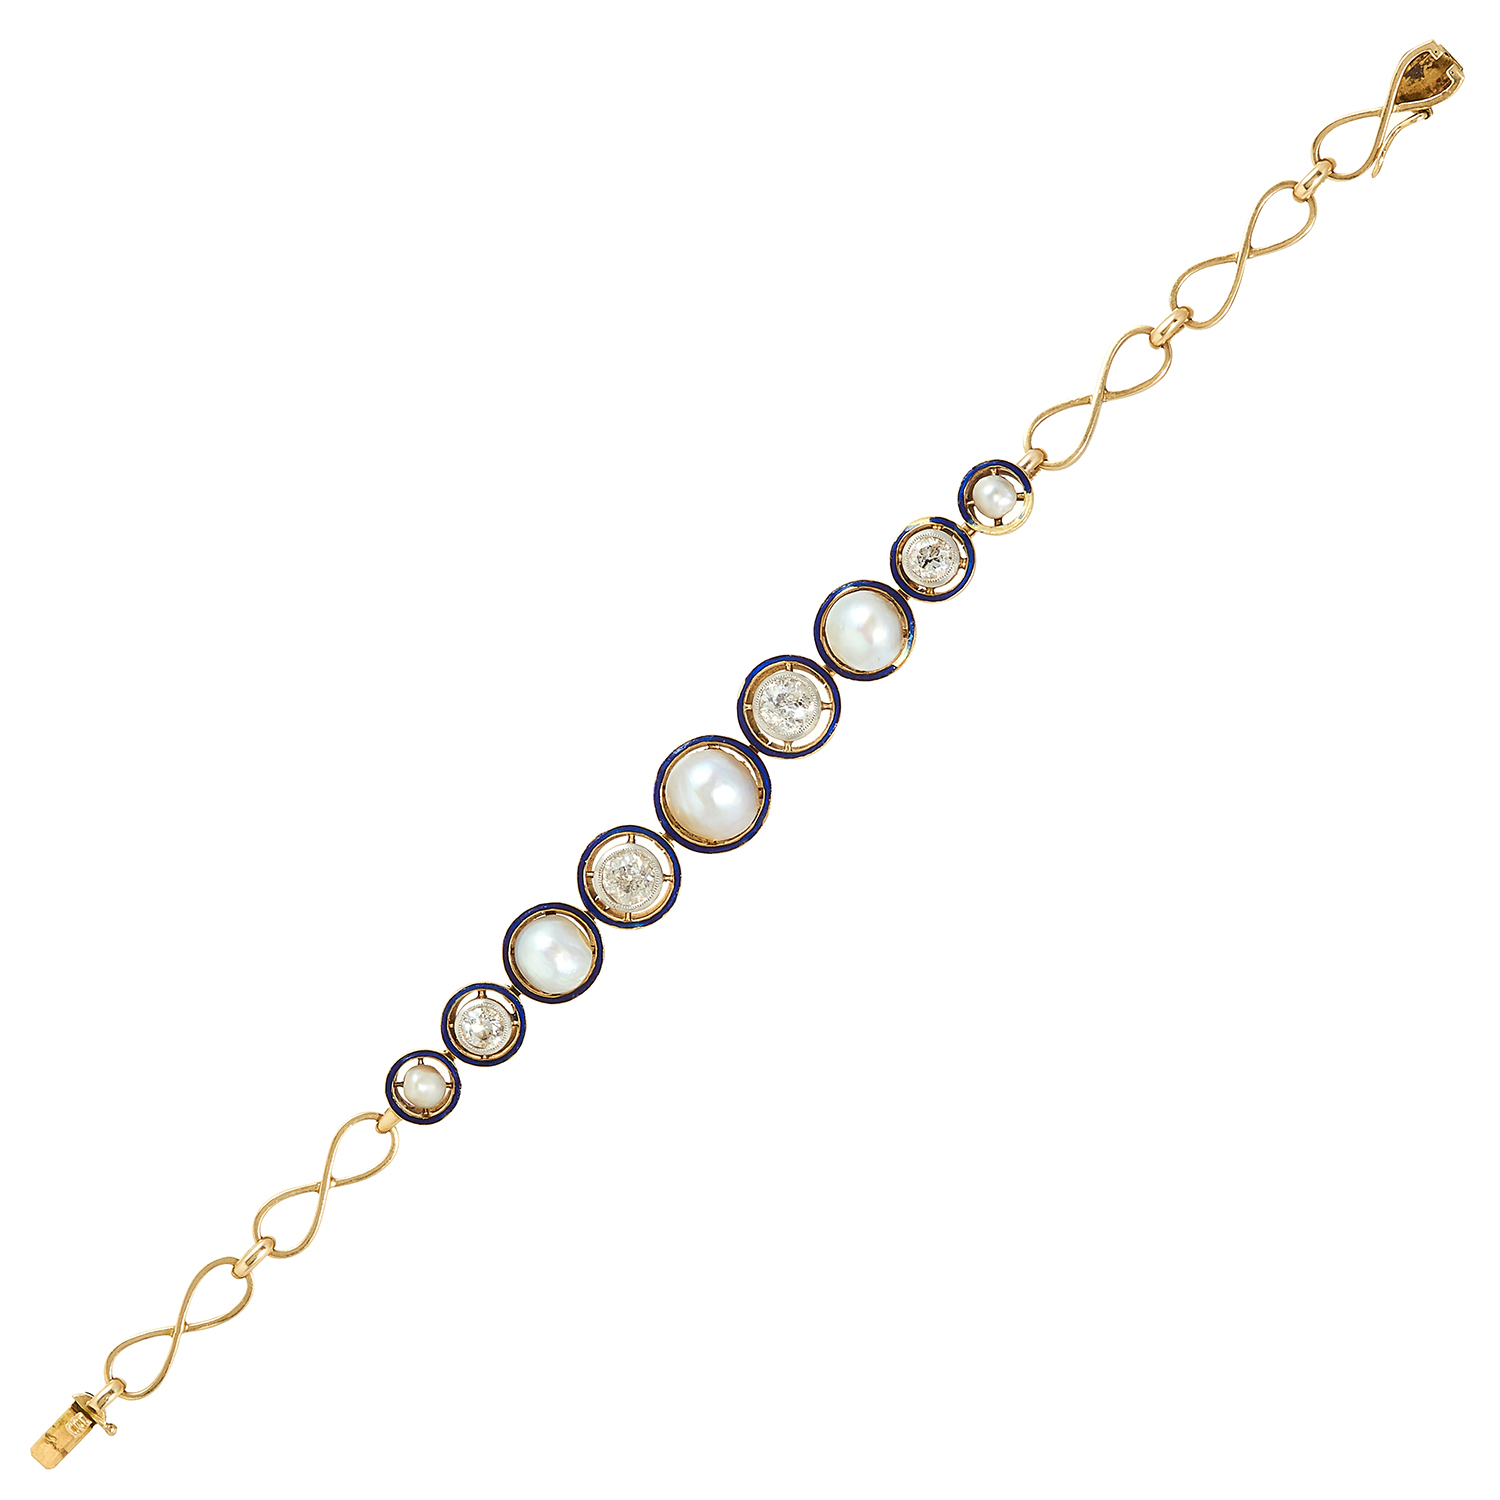 AN ART DECO NATURAL PEARL, DIAMOND AND ENAMEL BRACELET in high carat yellow gold, comprising a row